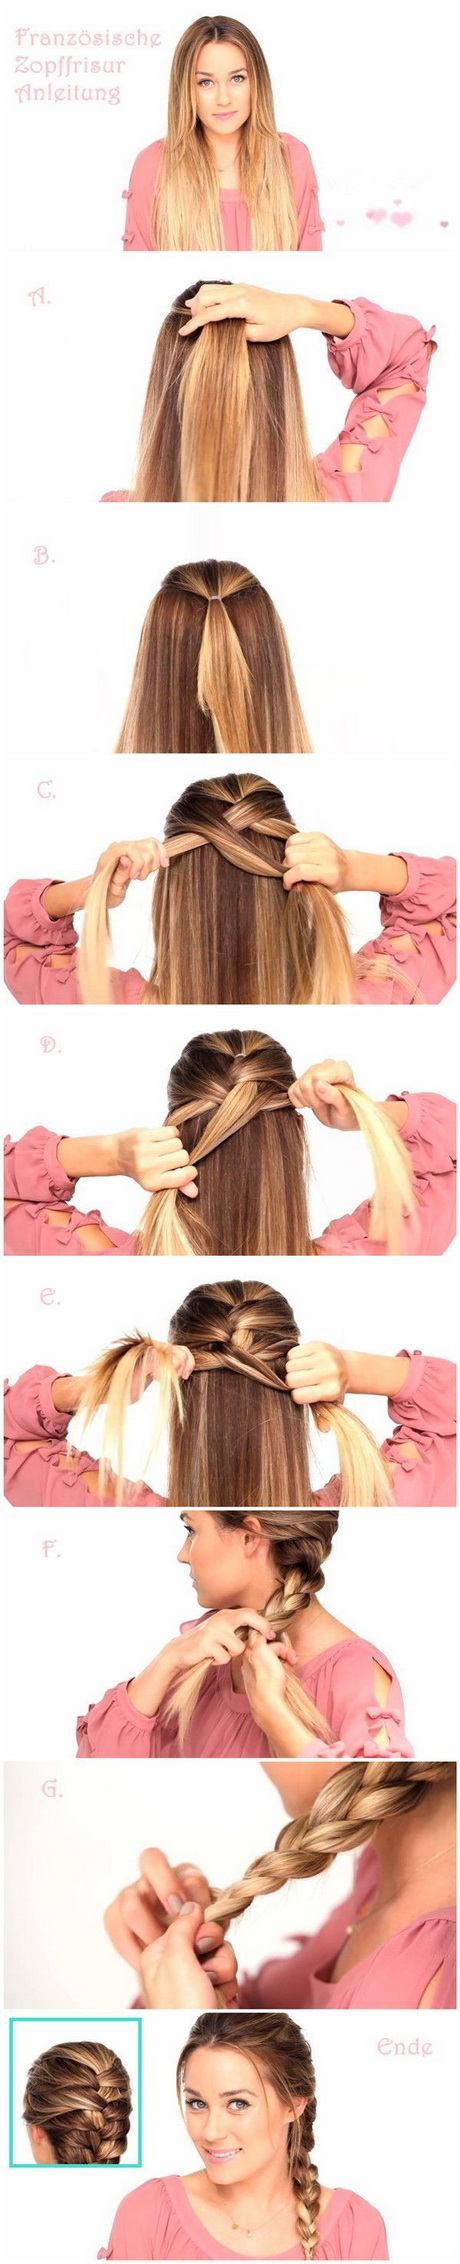 easy-to-do-braided-hairstyles-96_10 Easy to do braided hairstyles